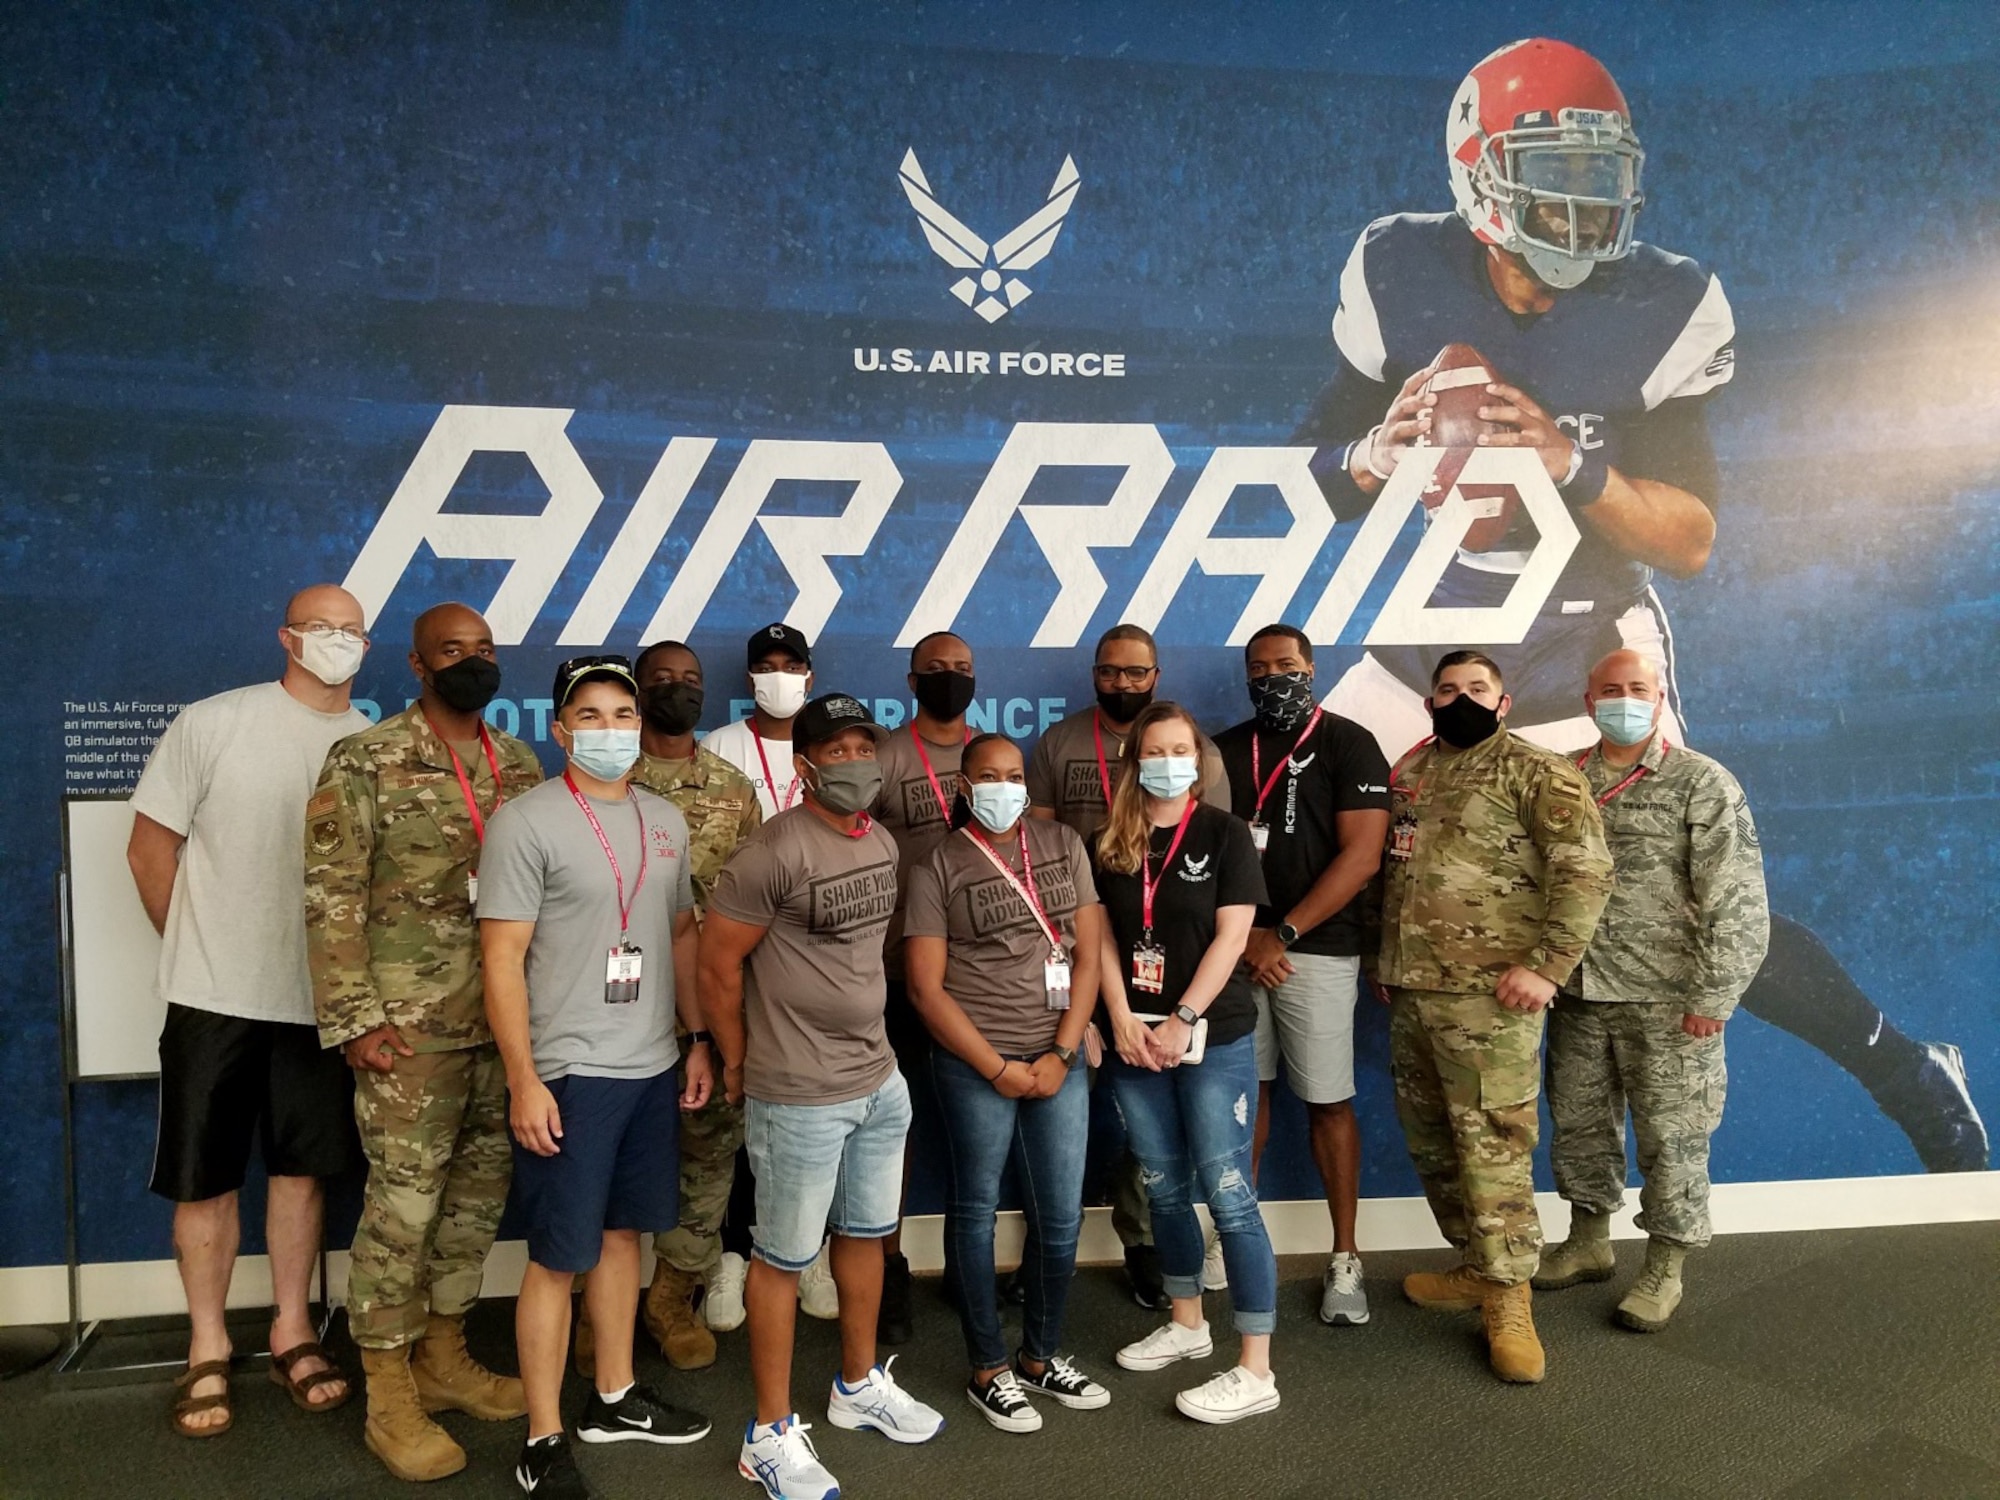 Total Force recruiters pose for a photo at the Chick-Fil-A College Football Hall of Fame, Aug. 28, 2020, in Atlanta Georgia. Air Force Recruiting Service recently signed a partnership with the HOF and the Air Force has a major exhibit called the Air Force Air Raid Quarterback Sim Experience.